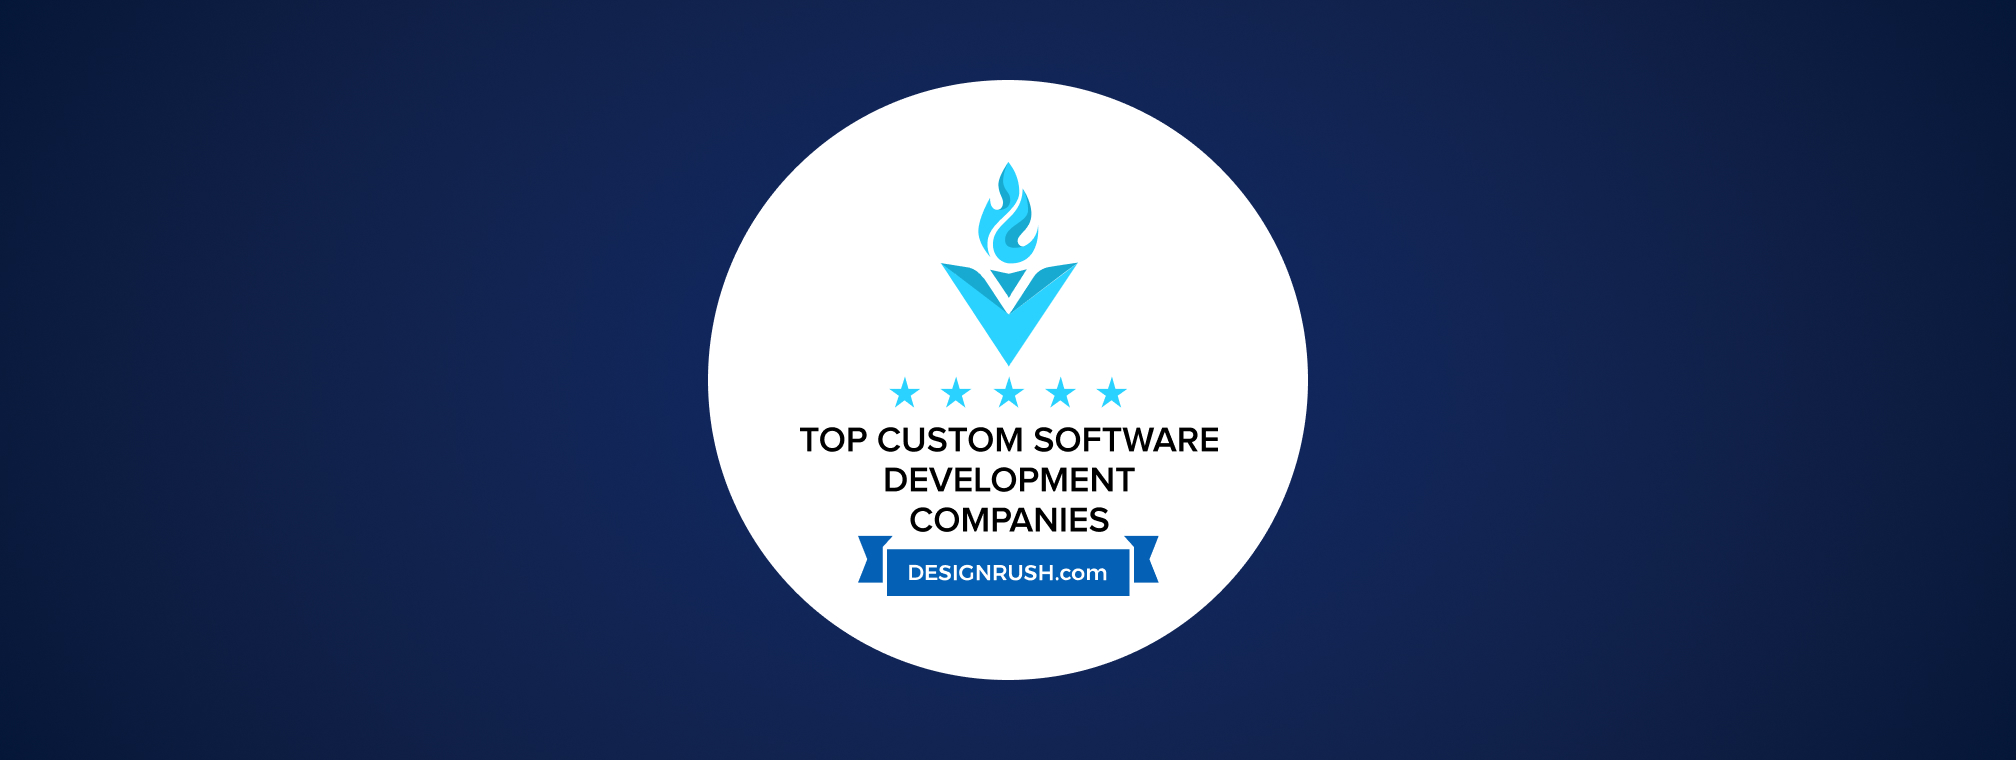 EffectiveSoft named one of the top 3 software development companies in the USA by DesignRush